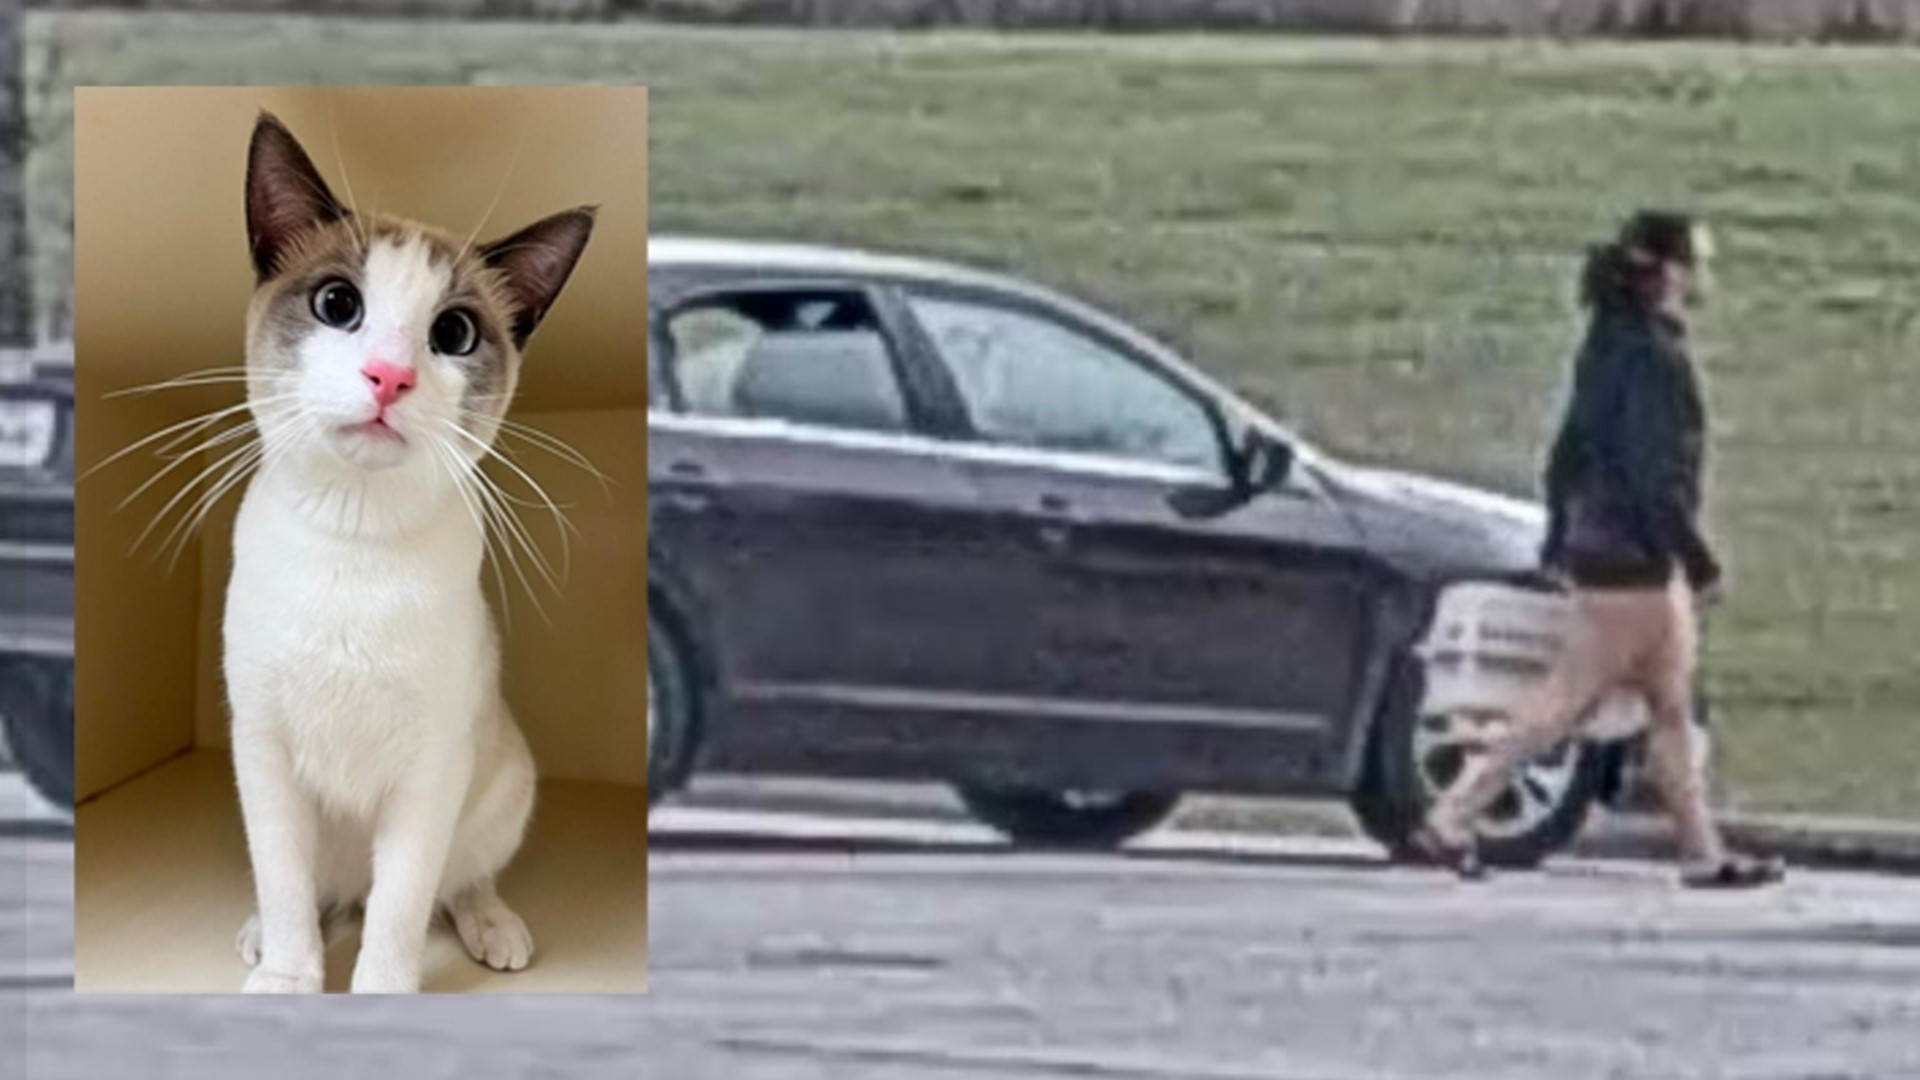 Animal control officials said they want to talk to the woman who was seen on video dumping a healthy, 2-year-old cat in a trash can at Seabourne Creek Nature Park.